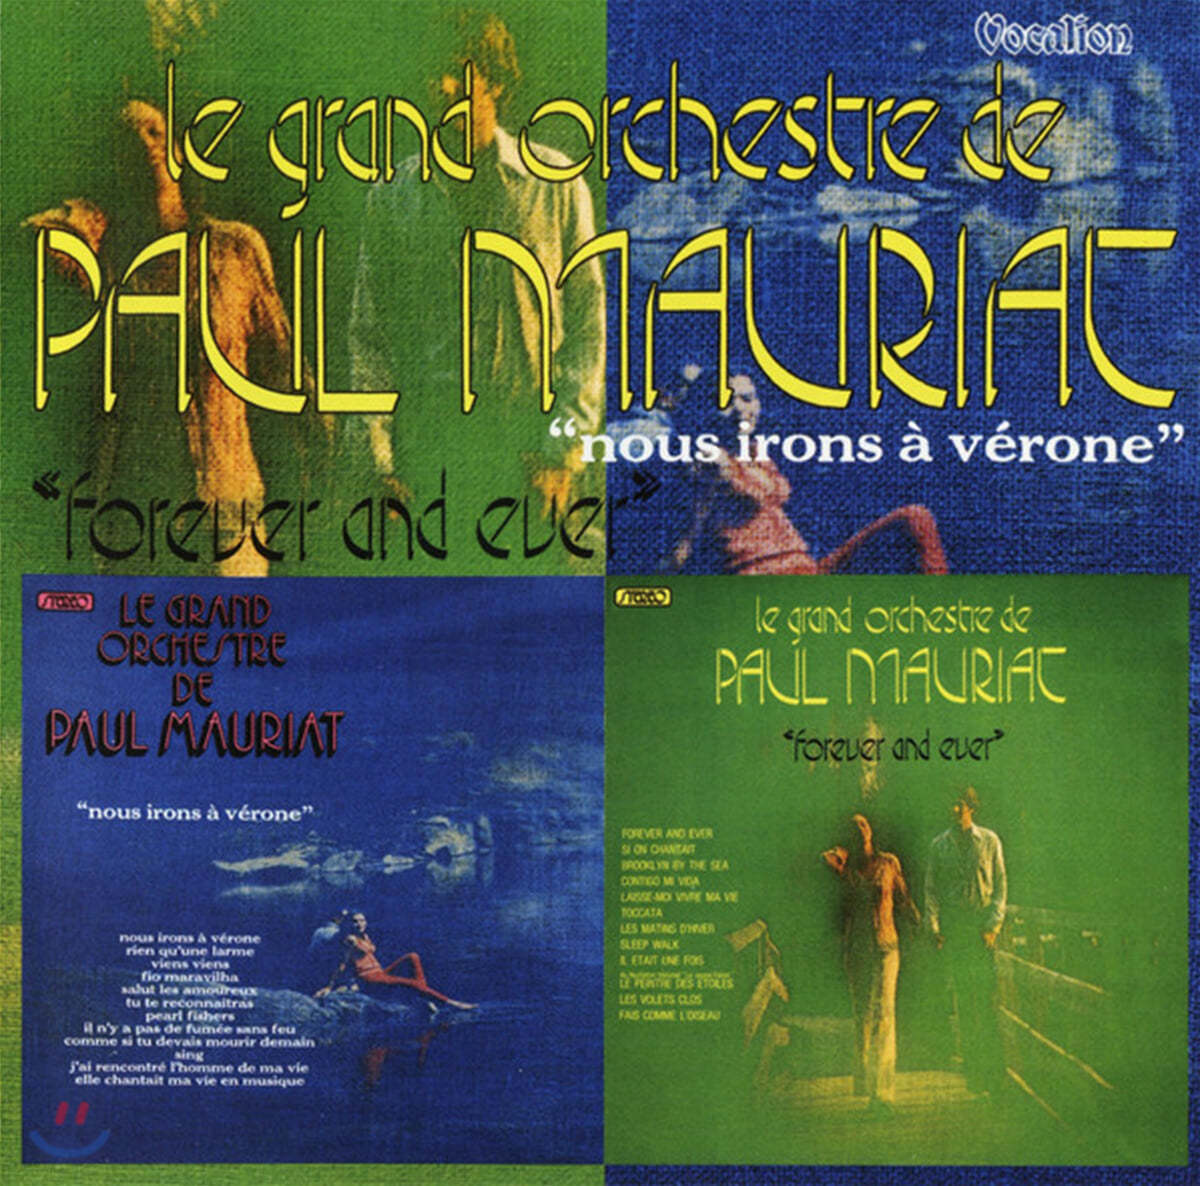 Paul Mauriat (폴 모리아) - Forever And Ever &amp; Nous Irons Verone